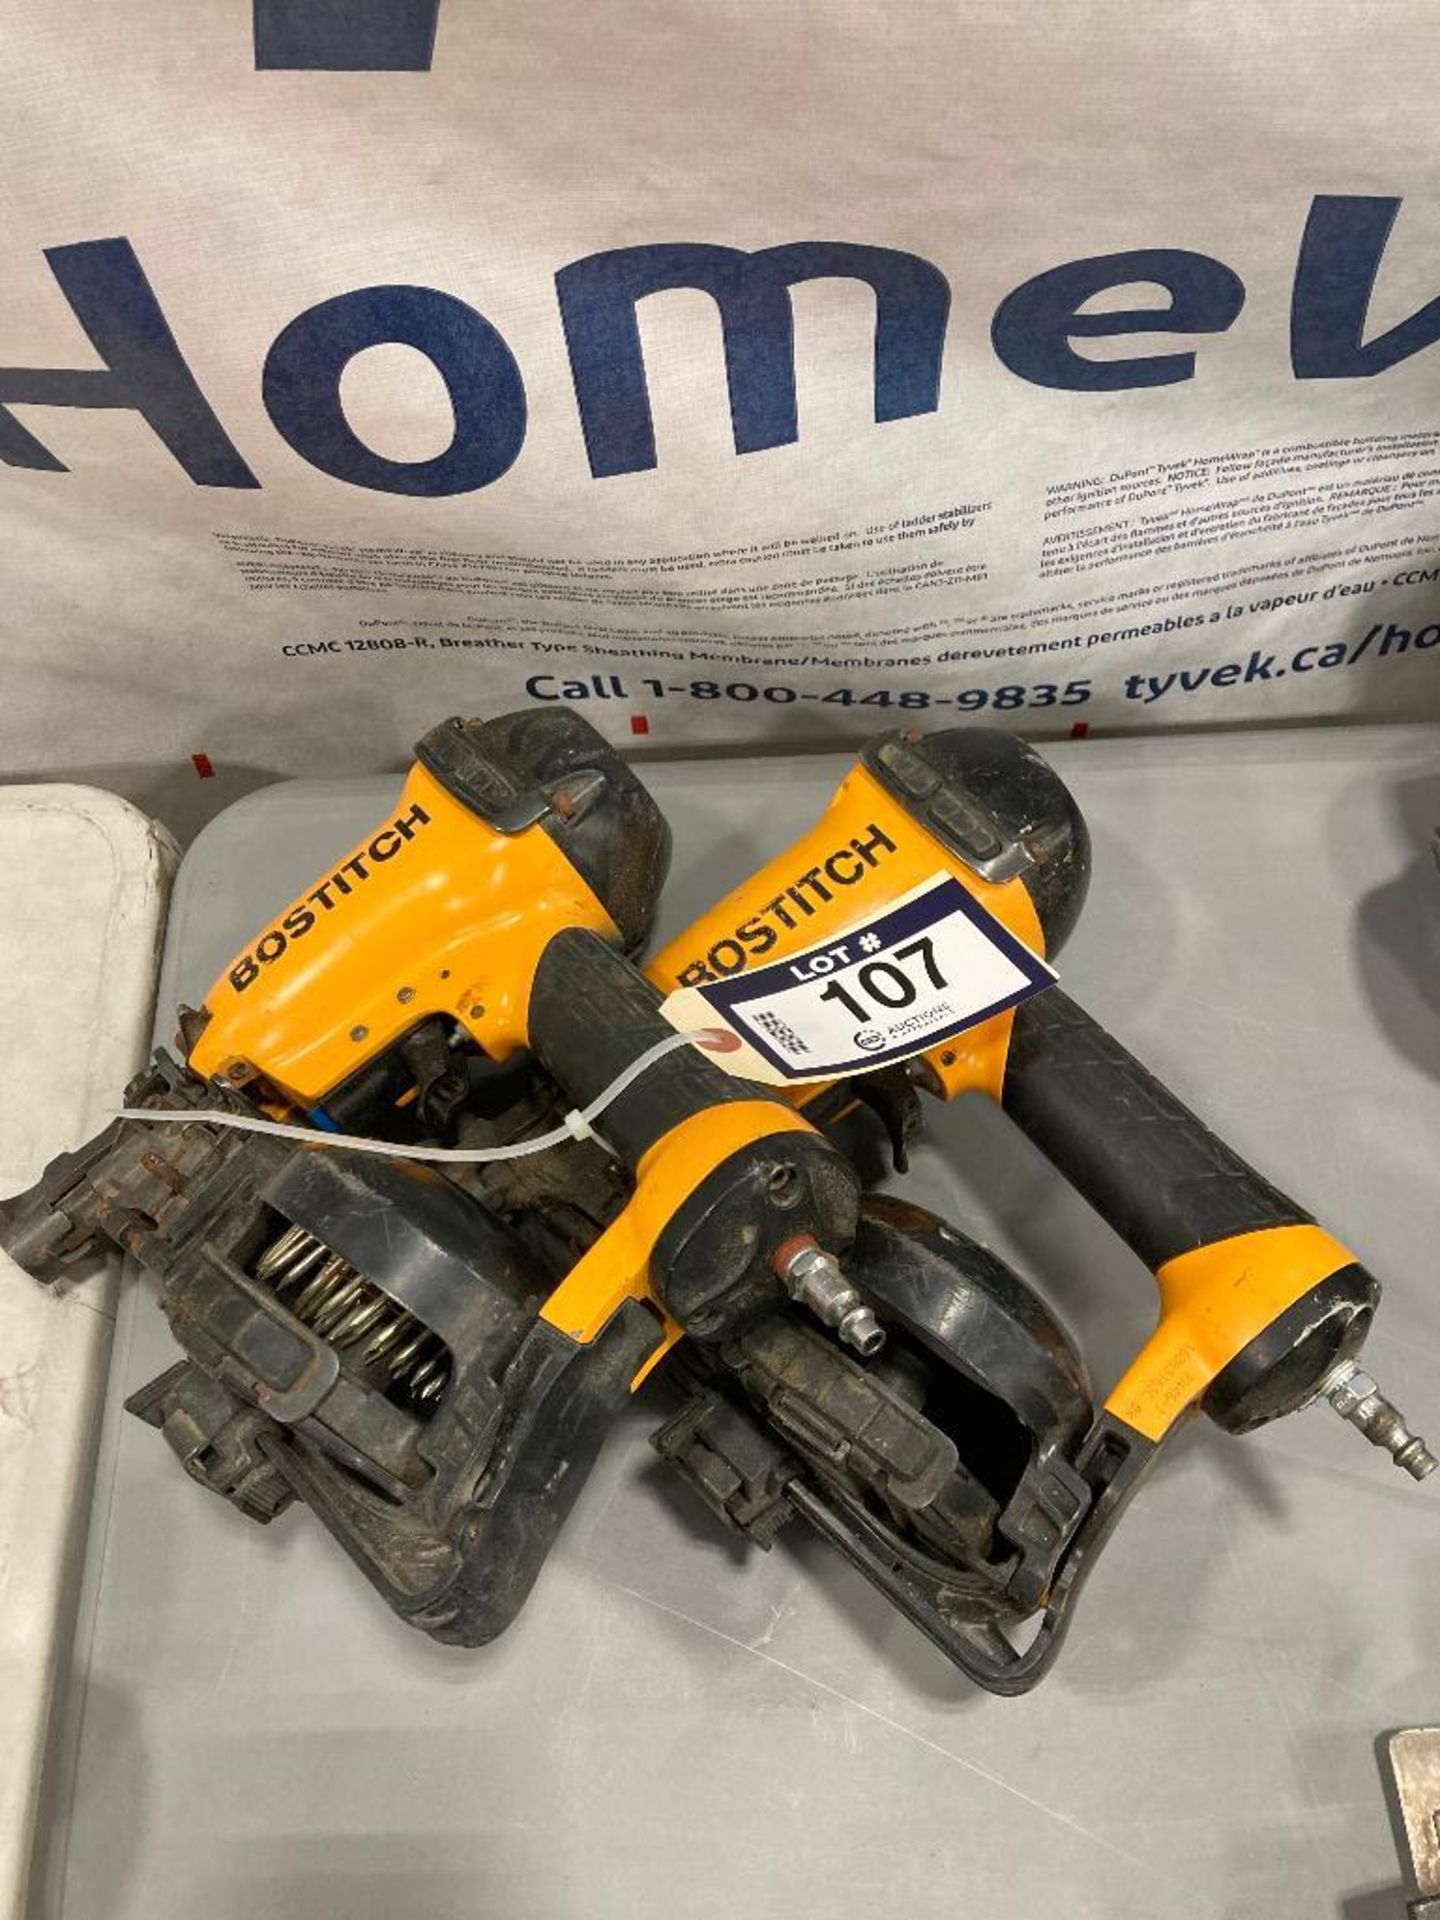 Lot of (2) Asst. Bostitch Nailers